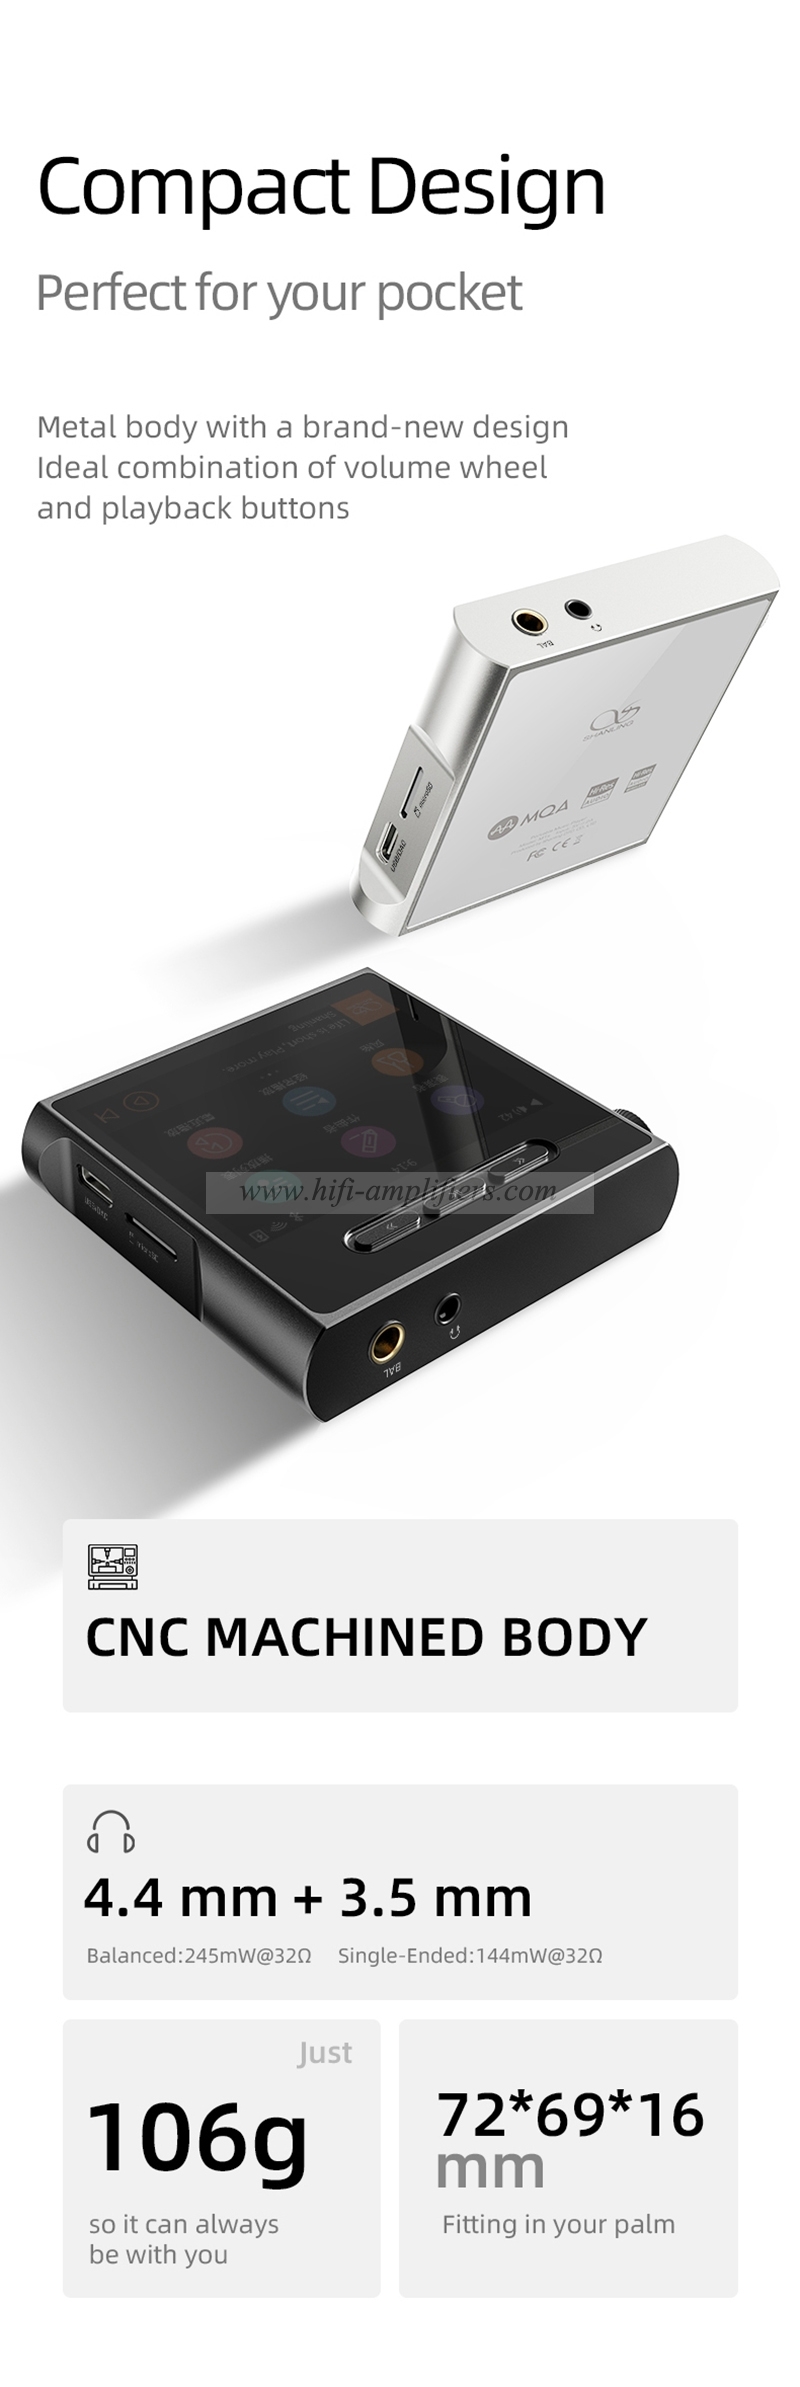 SHANLING M1S Portable Music Player MP3 Hi-Res Audio Bluetooth 5.0 ES9038Q2M DAC 2* RT6863 AMP chips 3.5/4.4mm Output DSD512